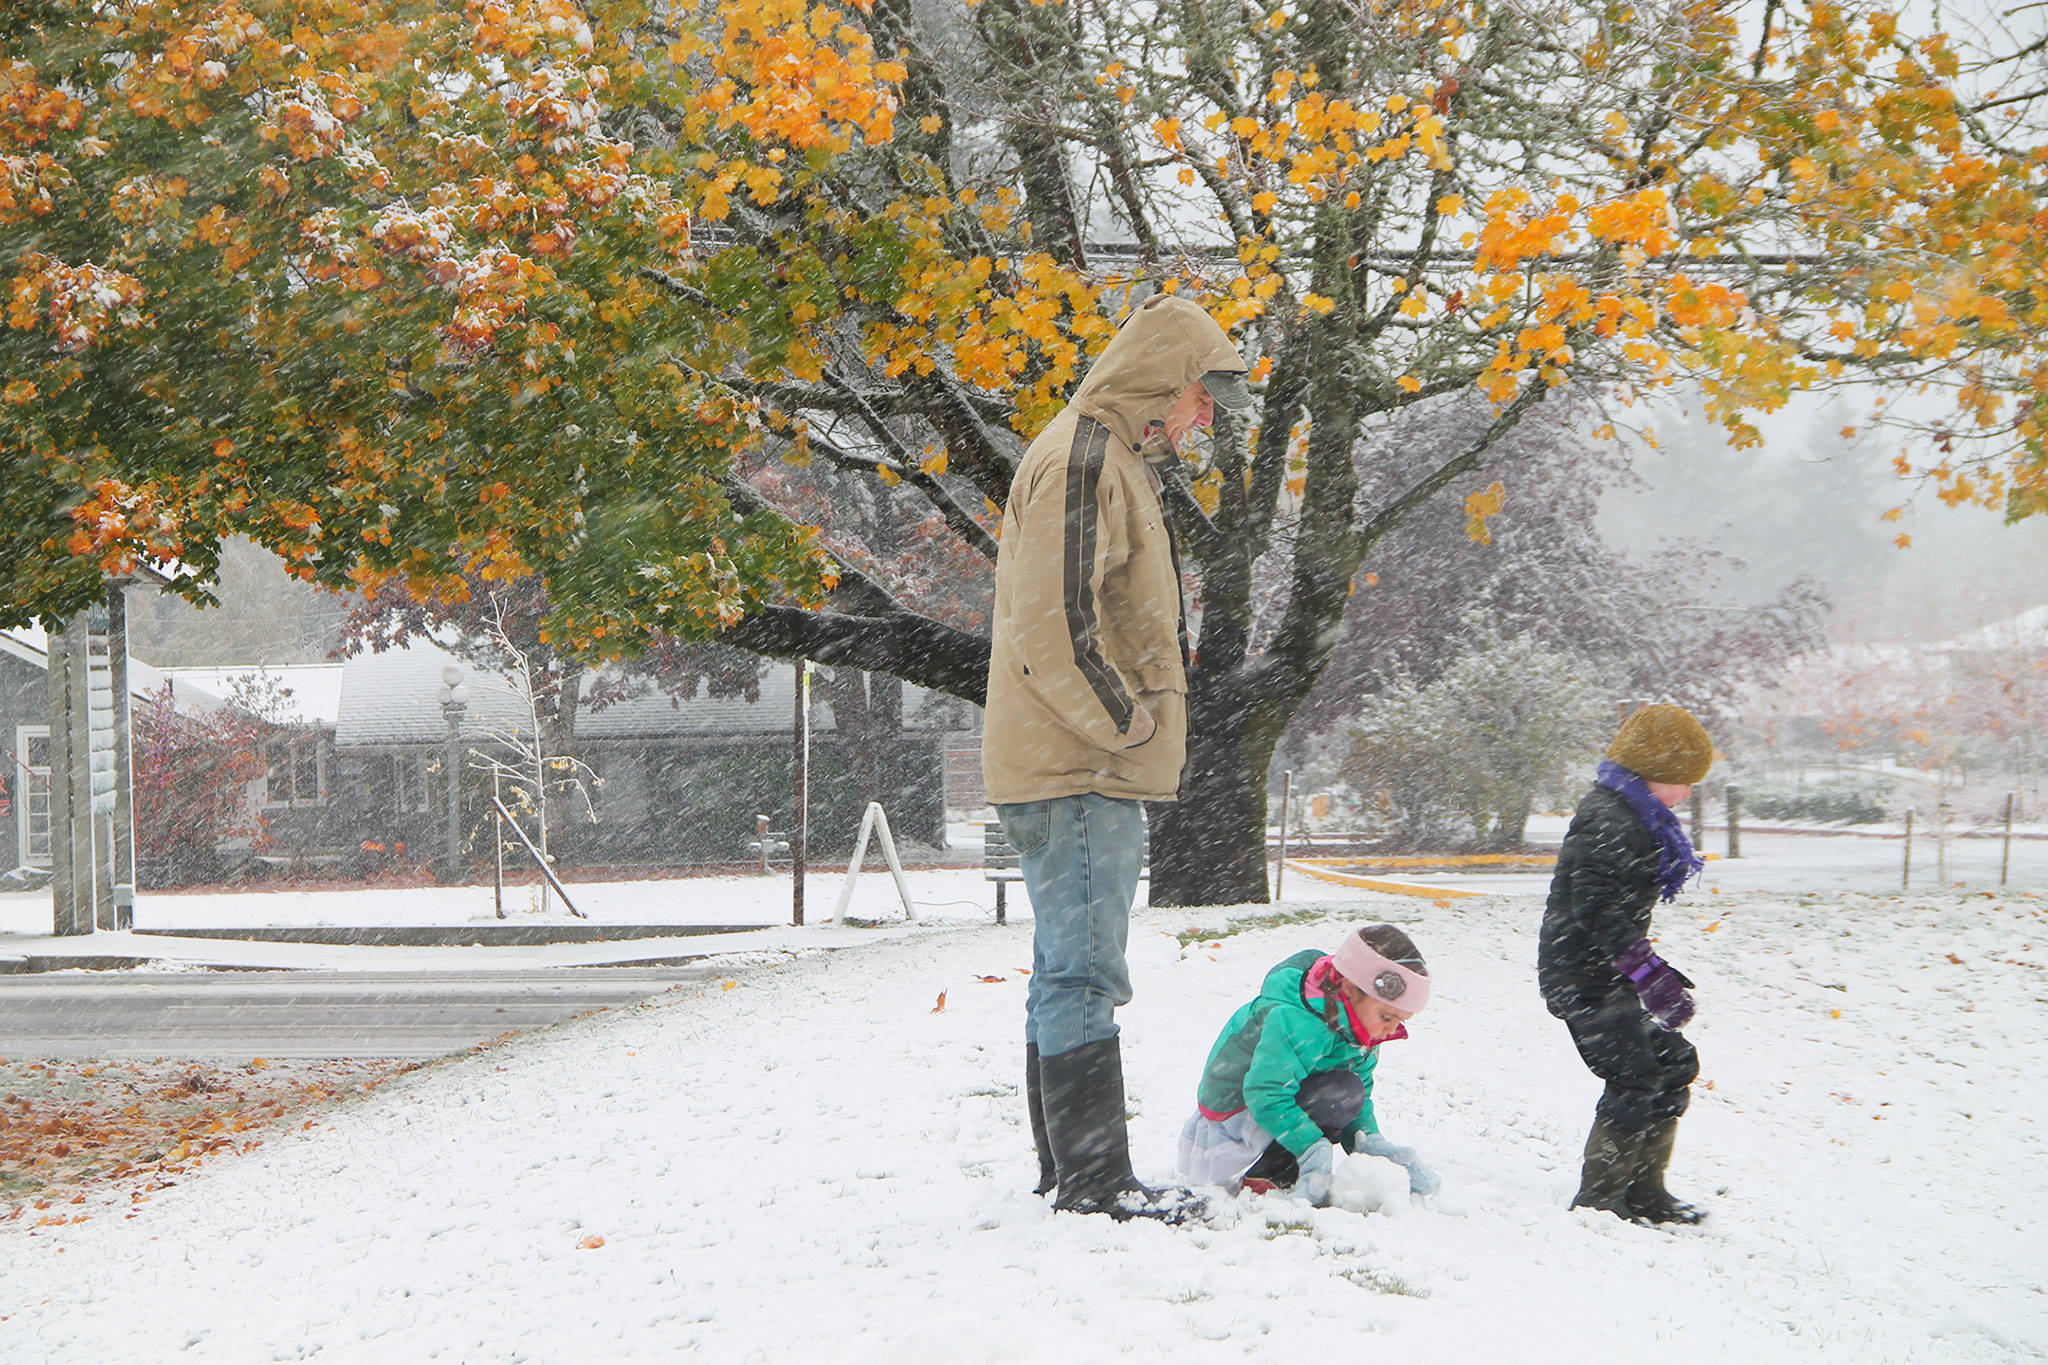 Flanked by a tree still displaying autumn color, children play in the snow in front of the Vashon Library Sunday afternoon. (Anneli Fogt/Staff Photo)